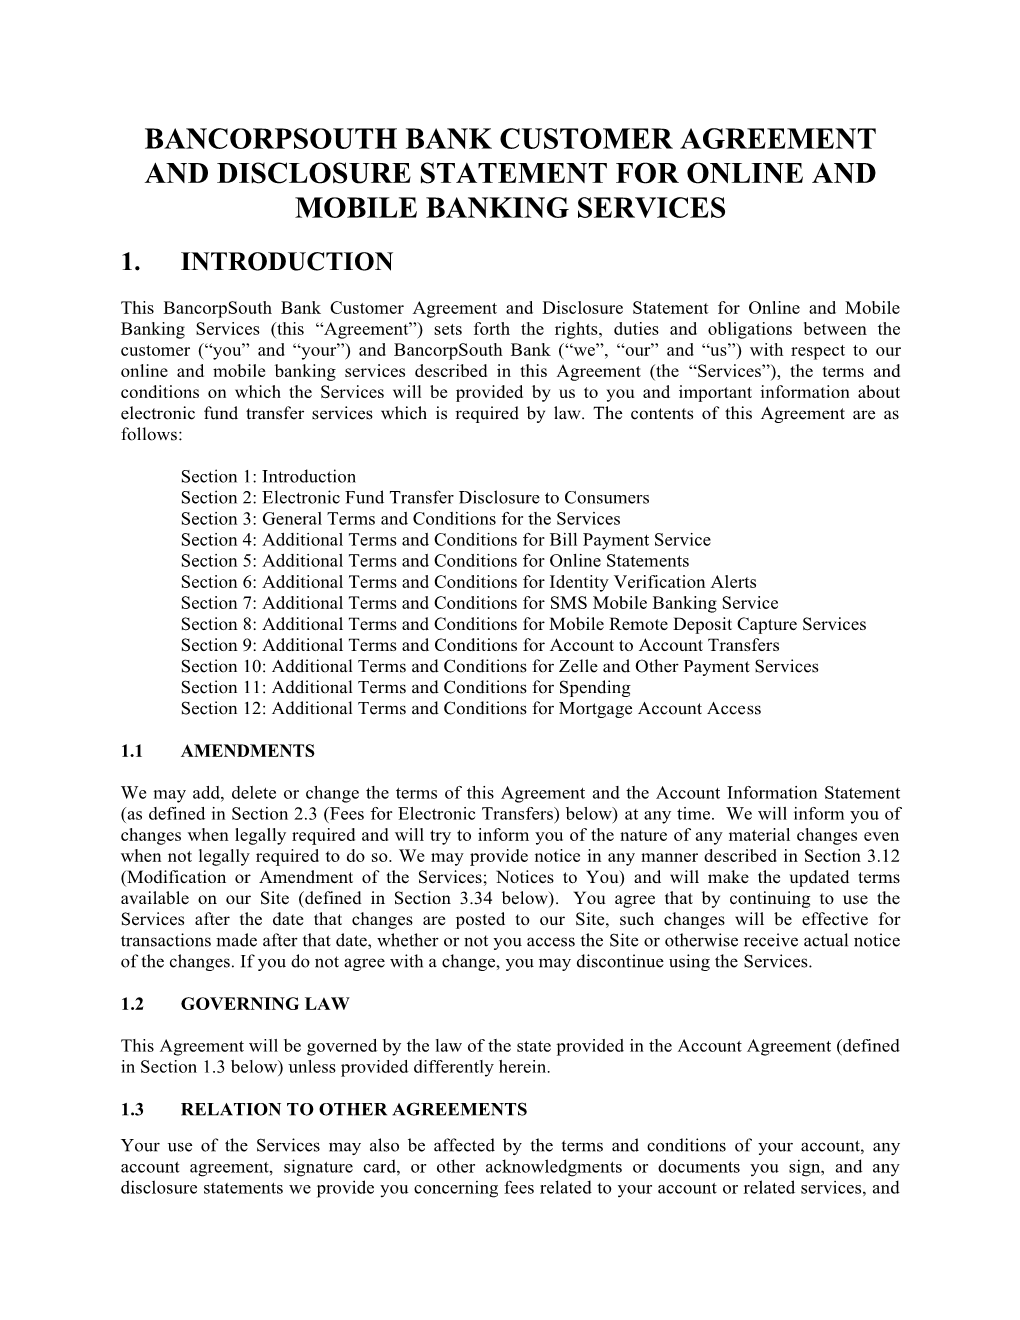 Bancorpsouth Bank Customer Agreement and Disclosure Statement for Online and Mobile Banking Services